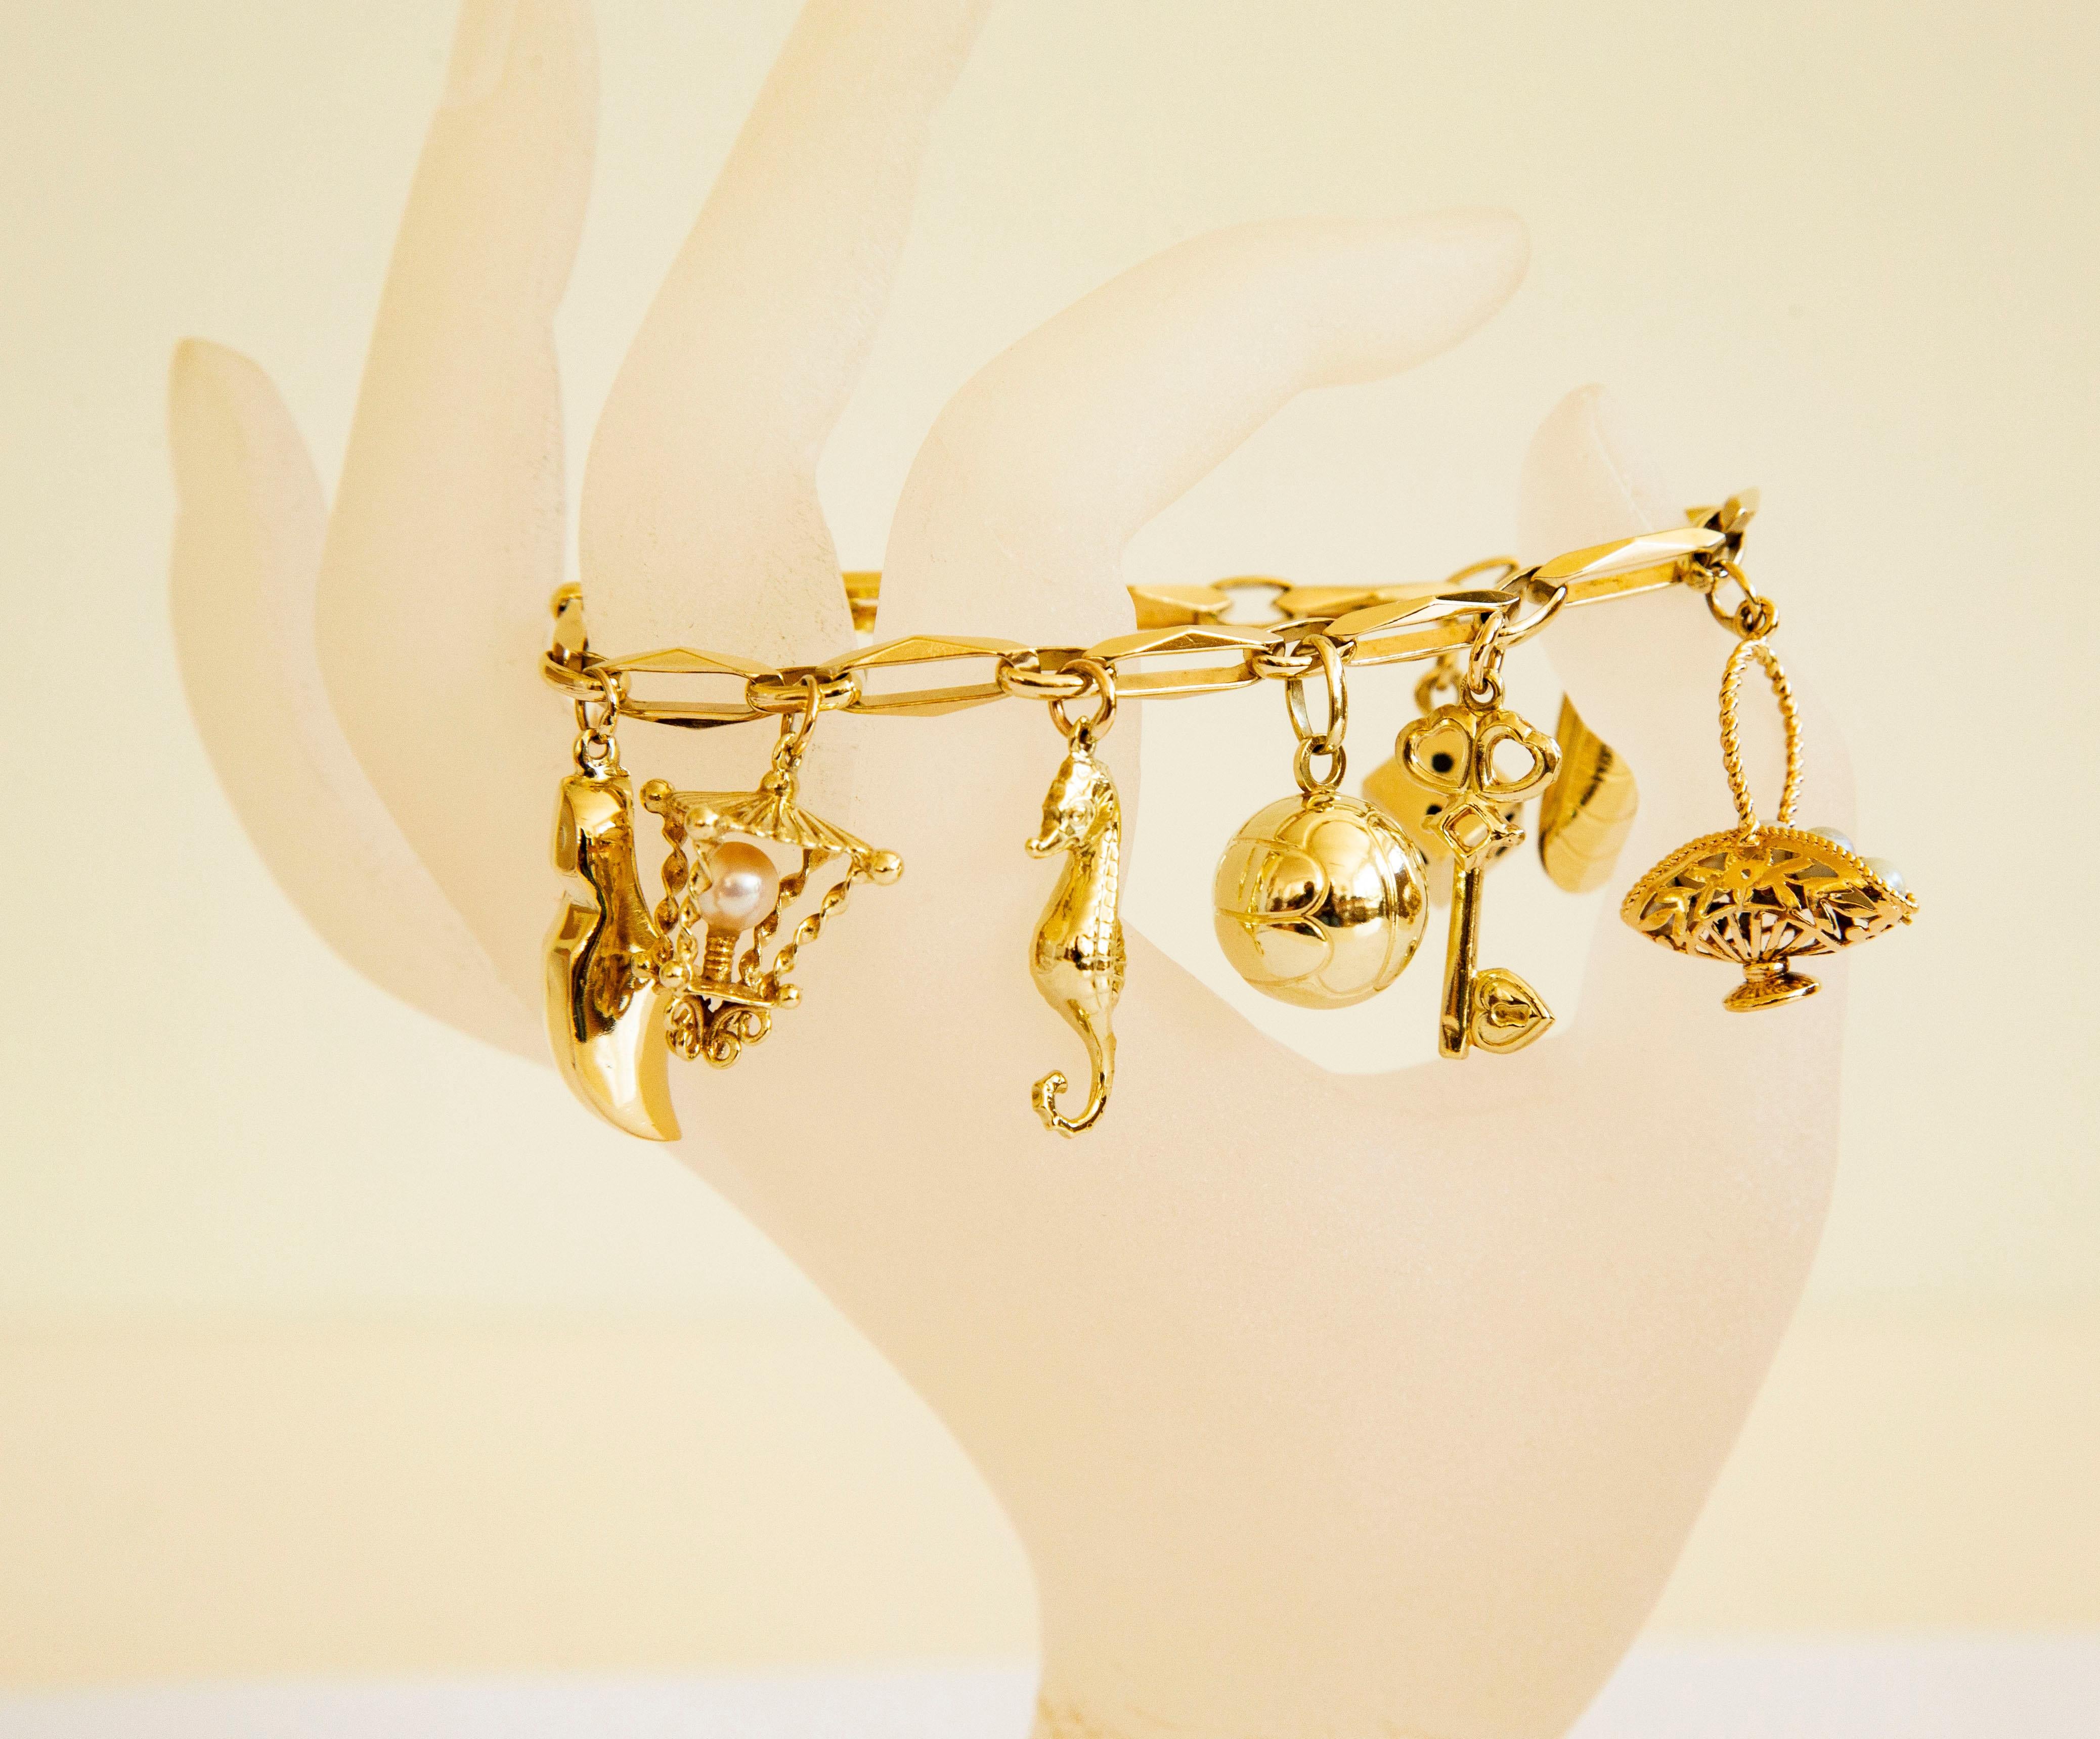 A vintage 14 karat yellow gold bracelet with 10 charms, including a hunting horn, a heart, a clog, a lantern, a seahorse, a ball, a key, a basket with five pearls, a mussel, and a dice. 
The bracelet was manufactured in the middle of the 20th